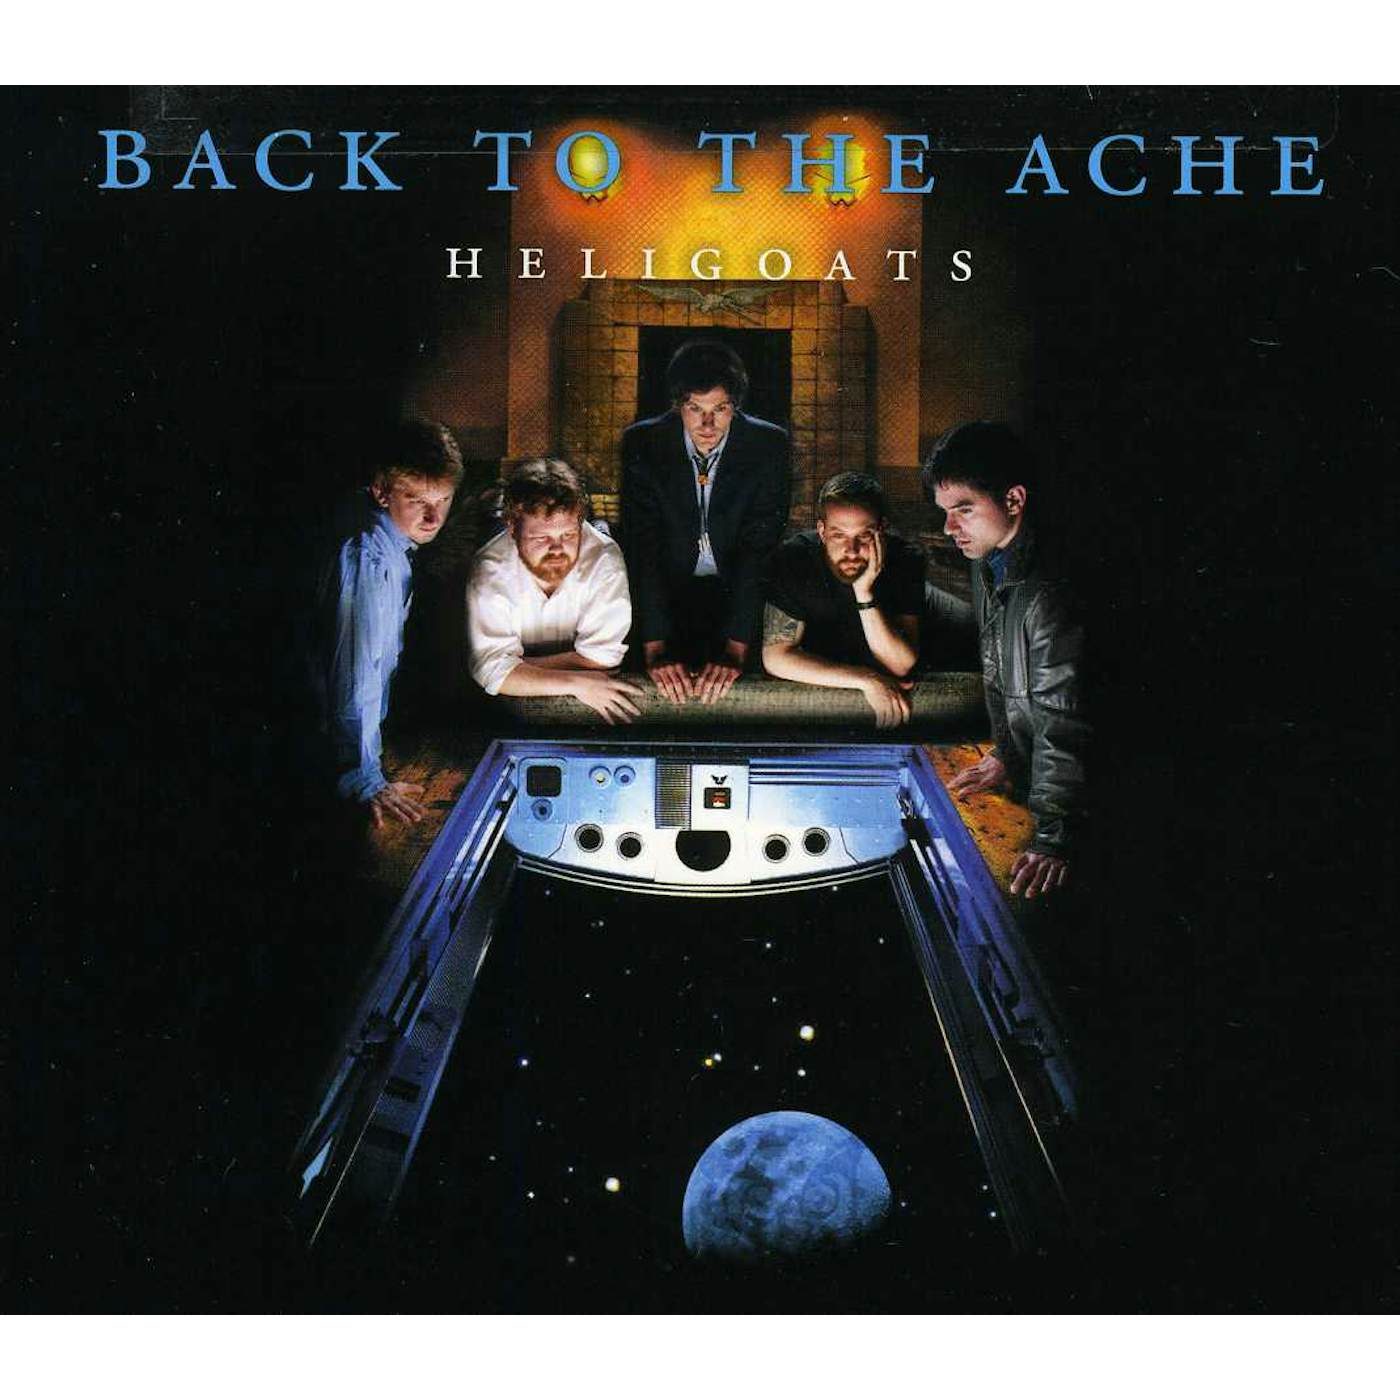 The Heligoats BACK TO THE ACHE CD